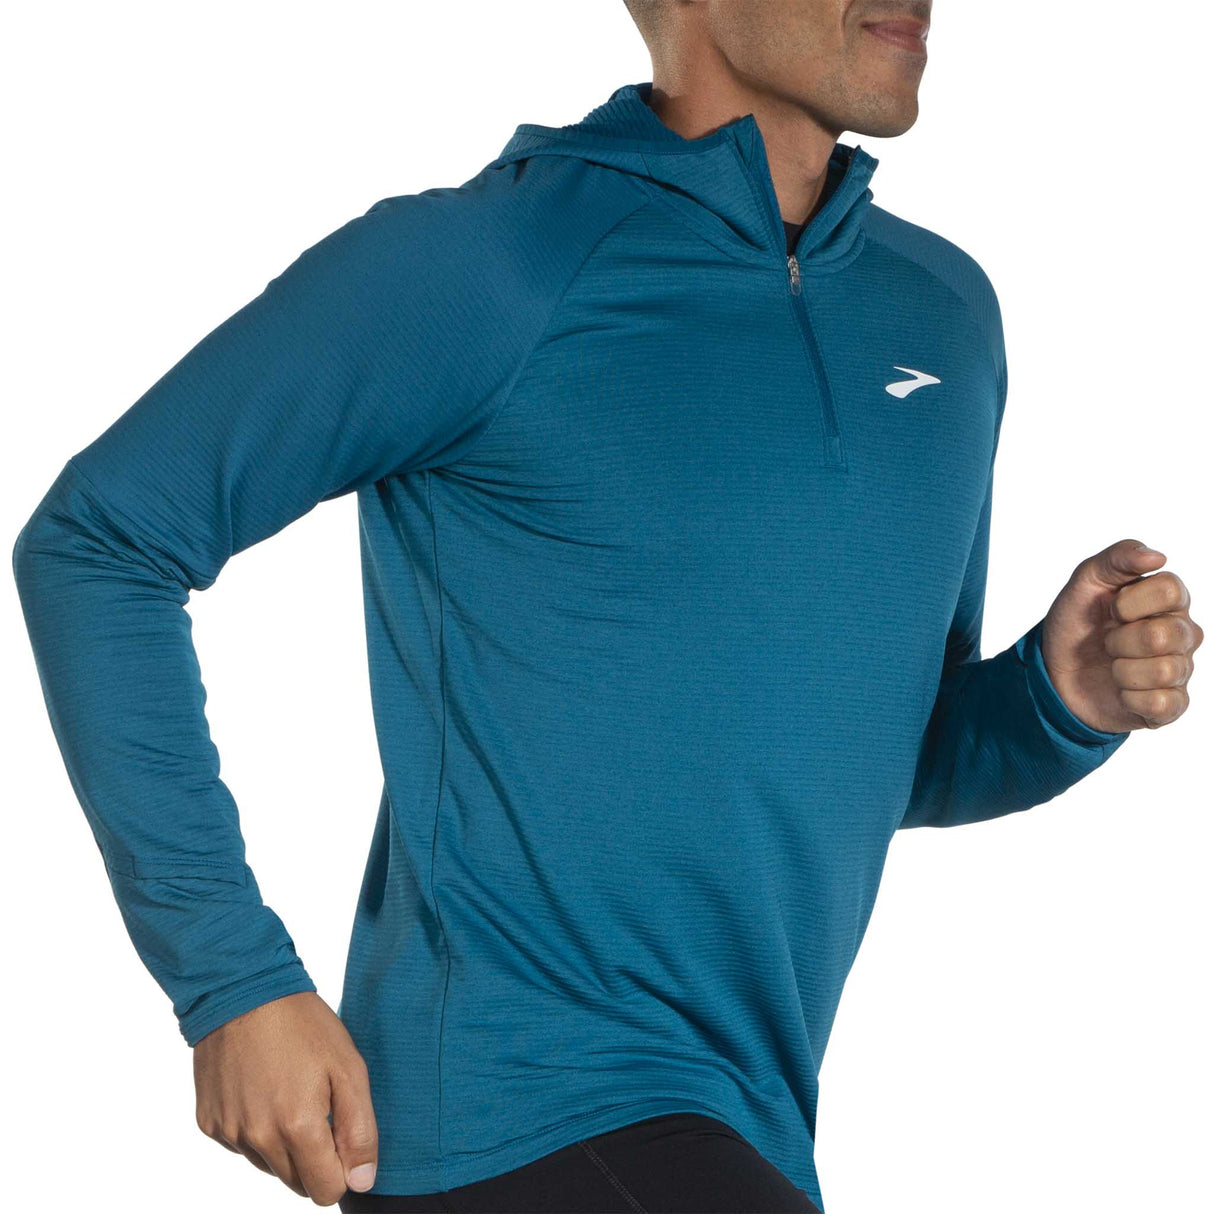 Brooks Notch Thermal Hoodie 2.0 chandail de course à pied homme heather dark ocean lateral